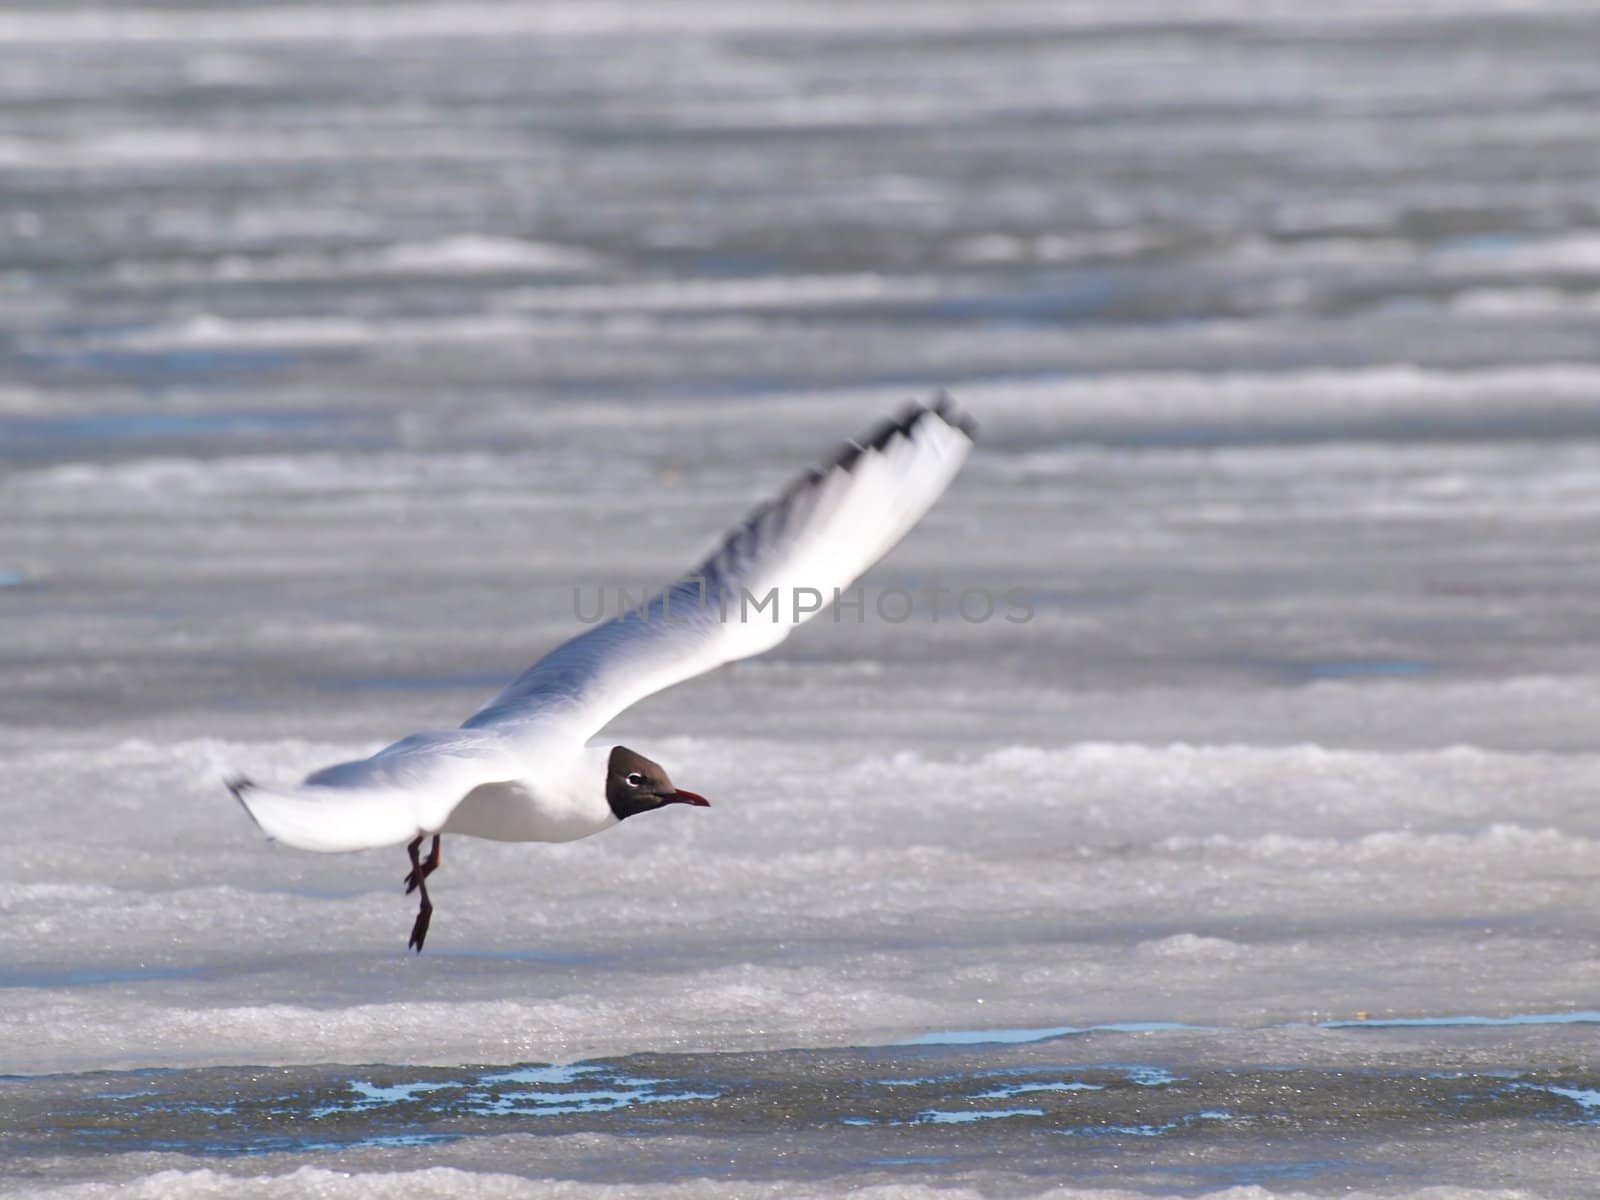 Hooded seagull taking off from the icey water at spring